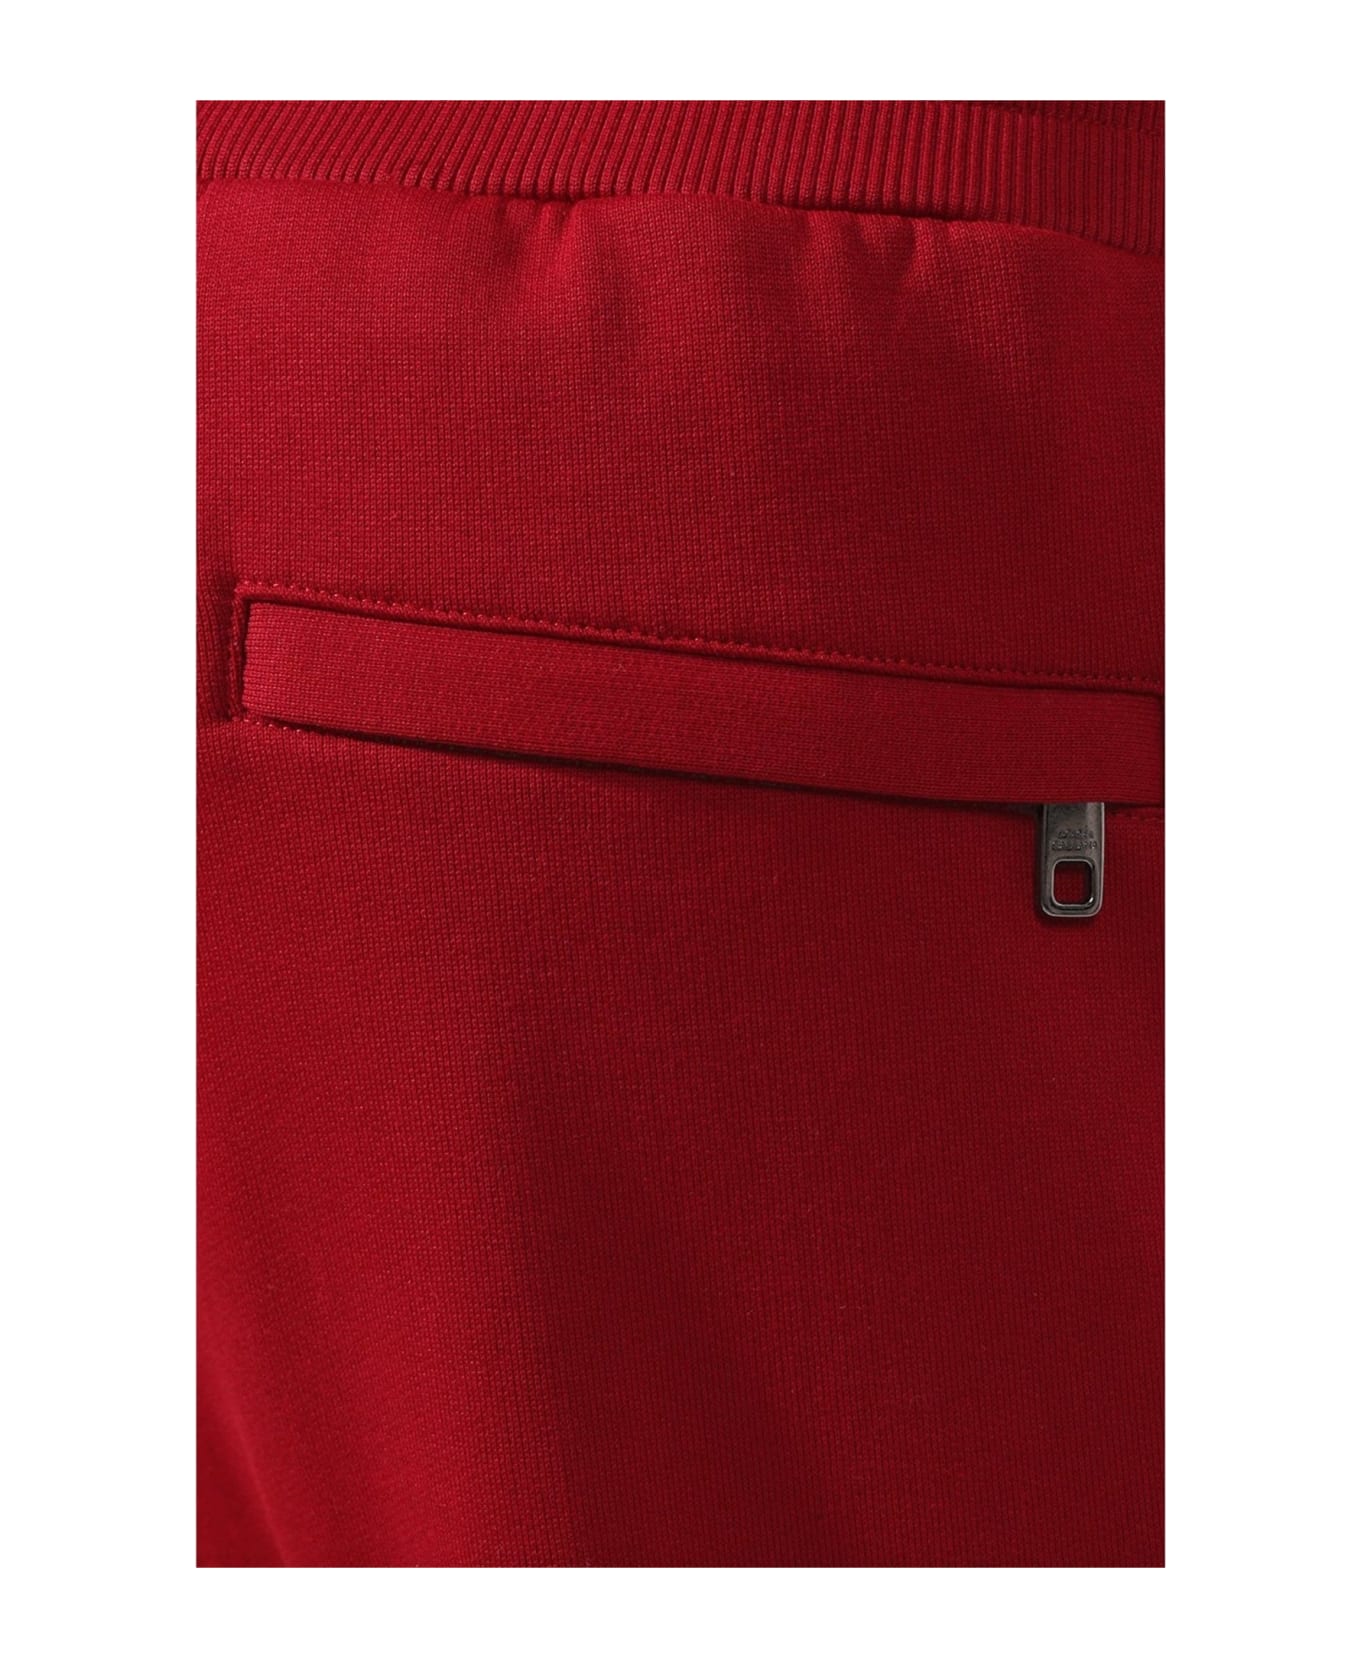 Dolce & Gabbana Jogging Style Pants - Red ボトムス